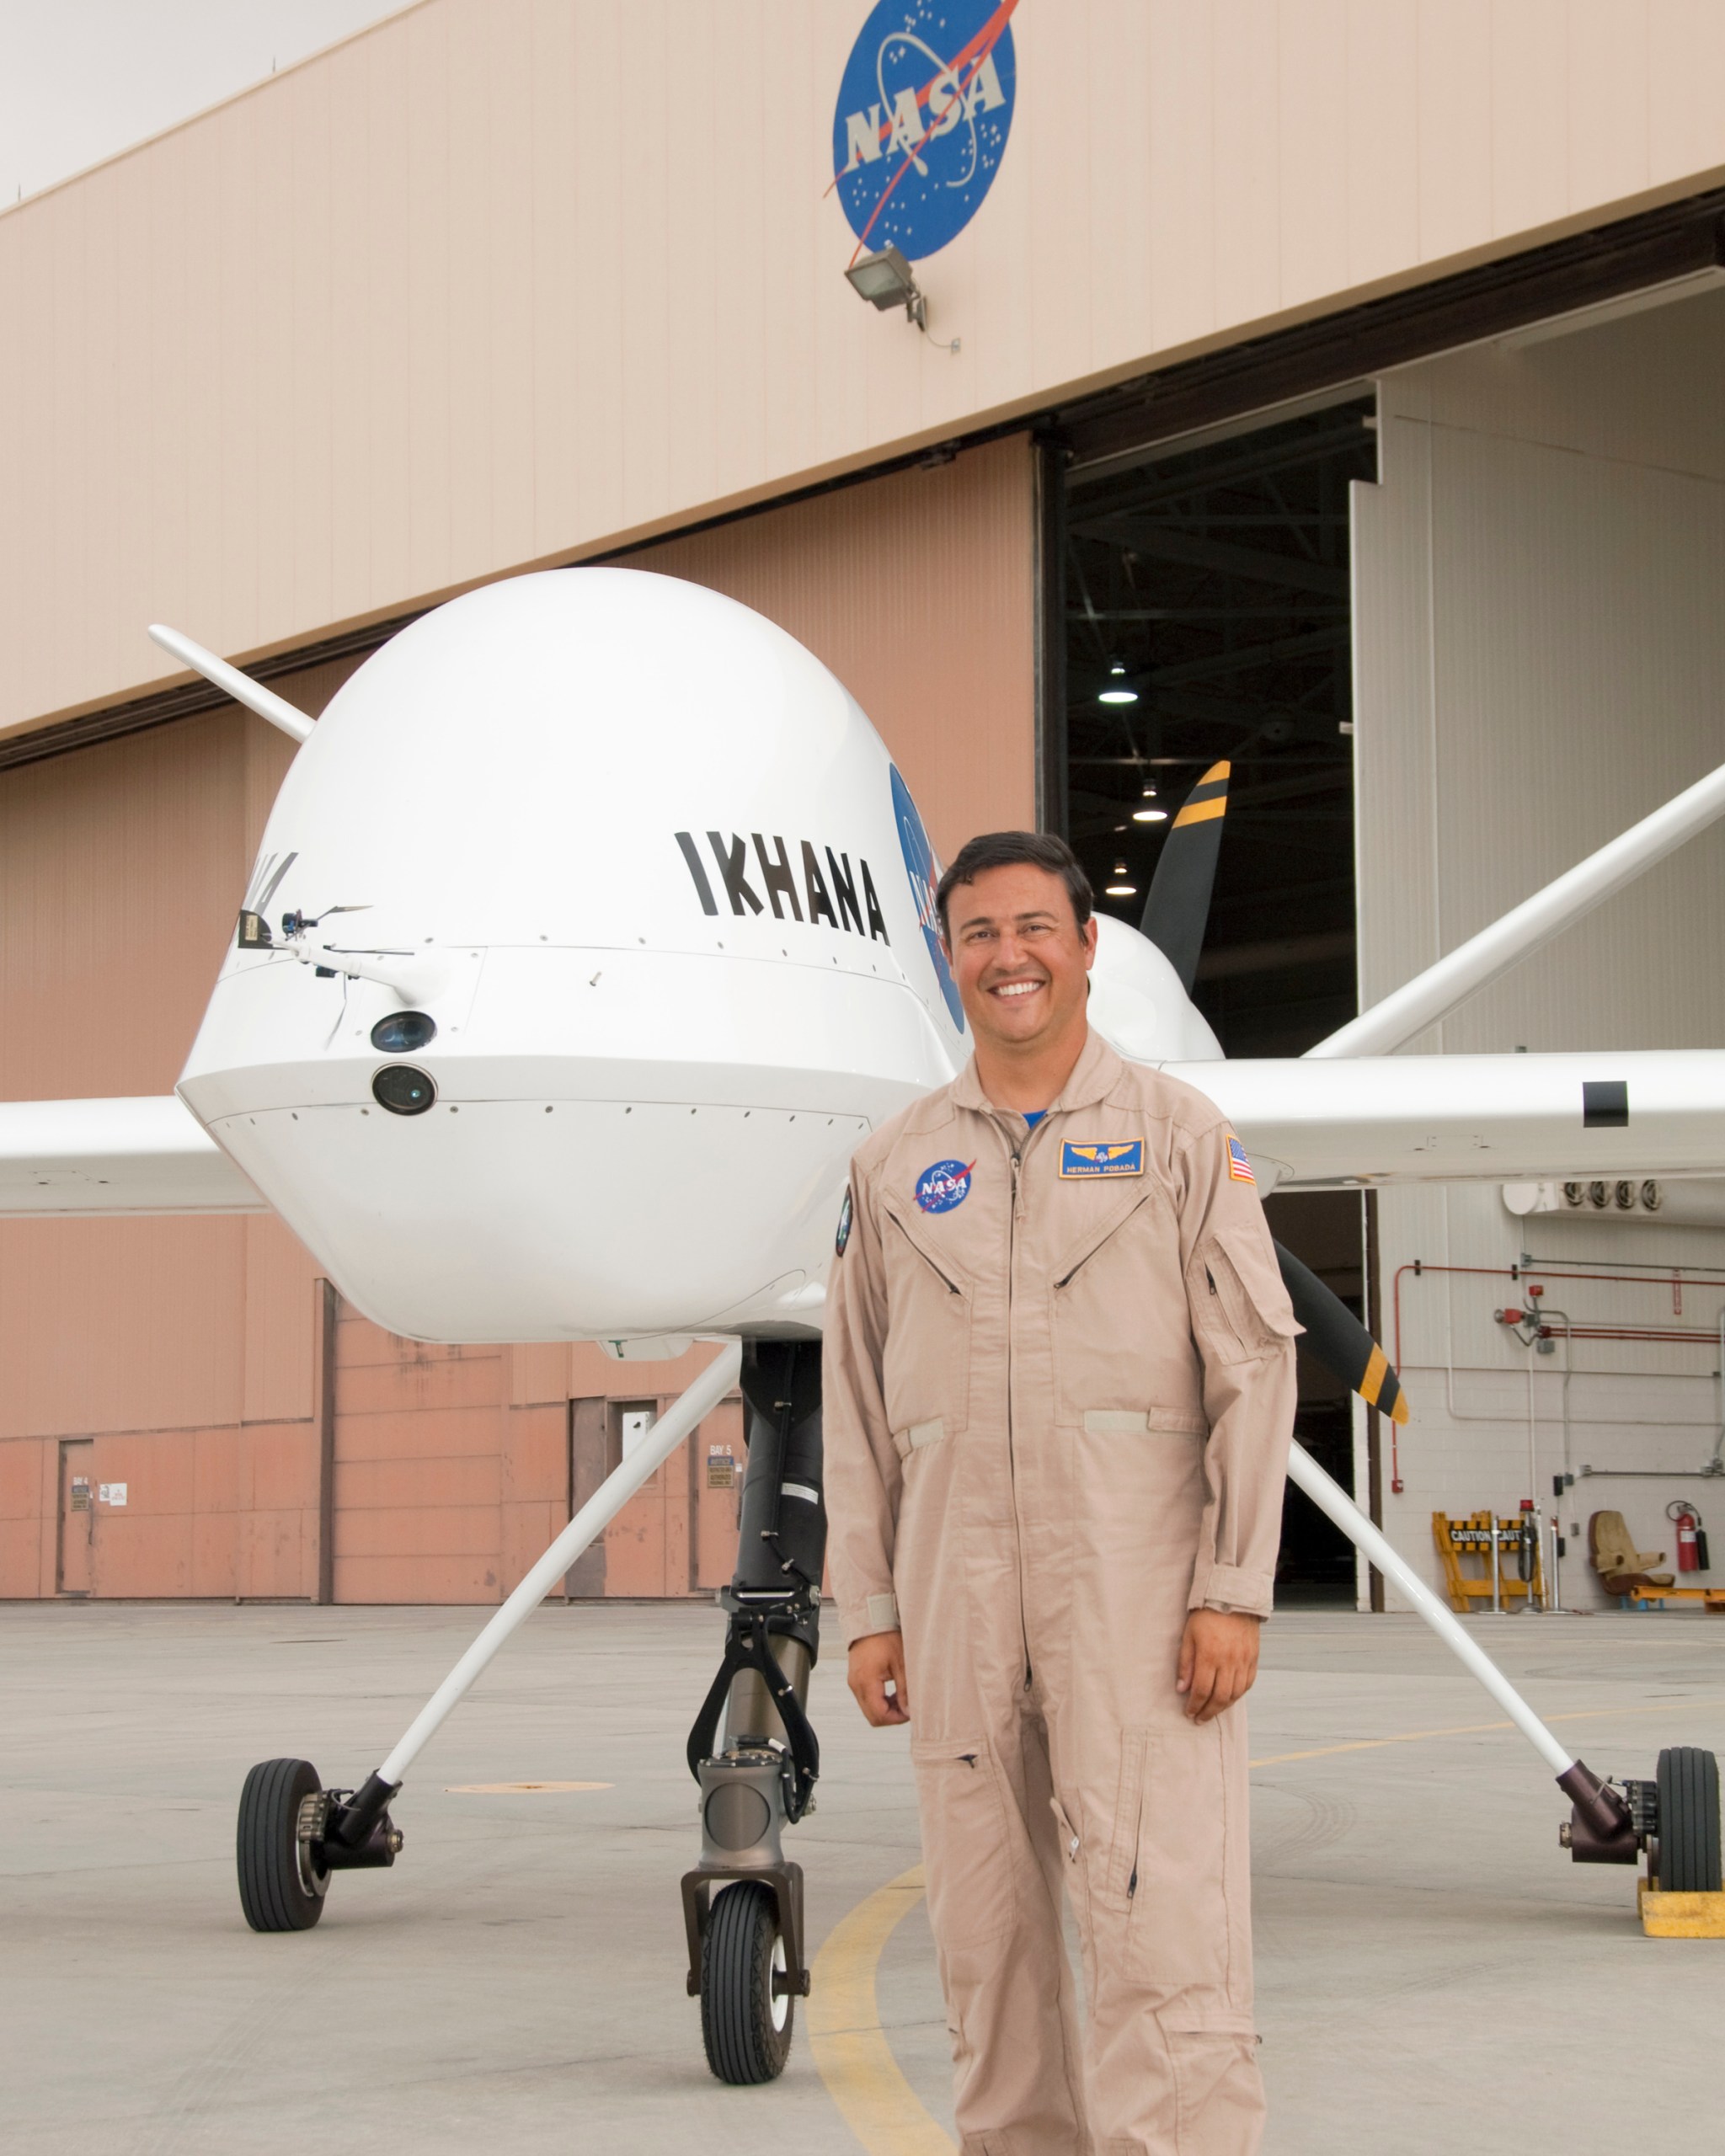 Pilot standing in front of an unmanned aircraft out side of a hangar during the day.